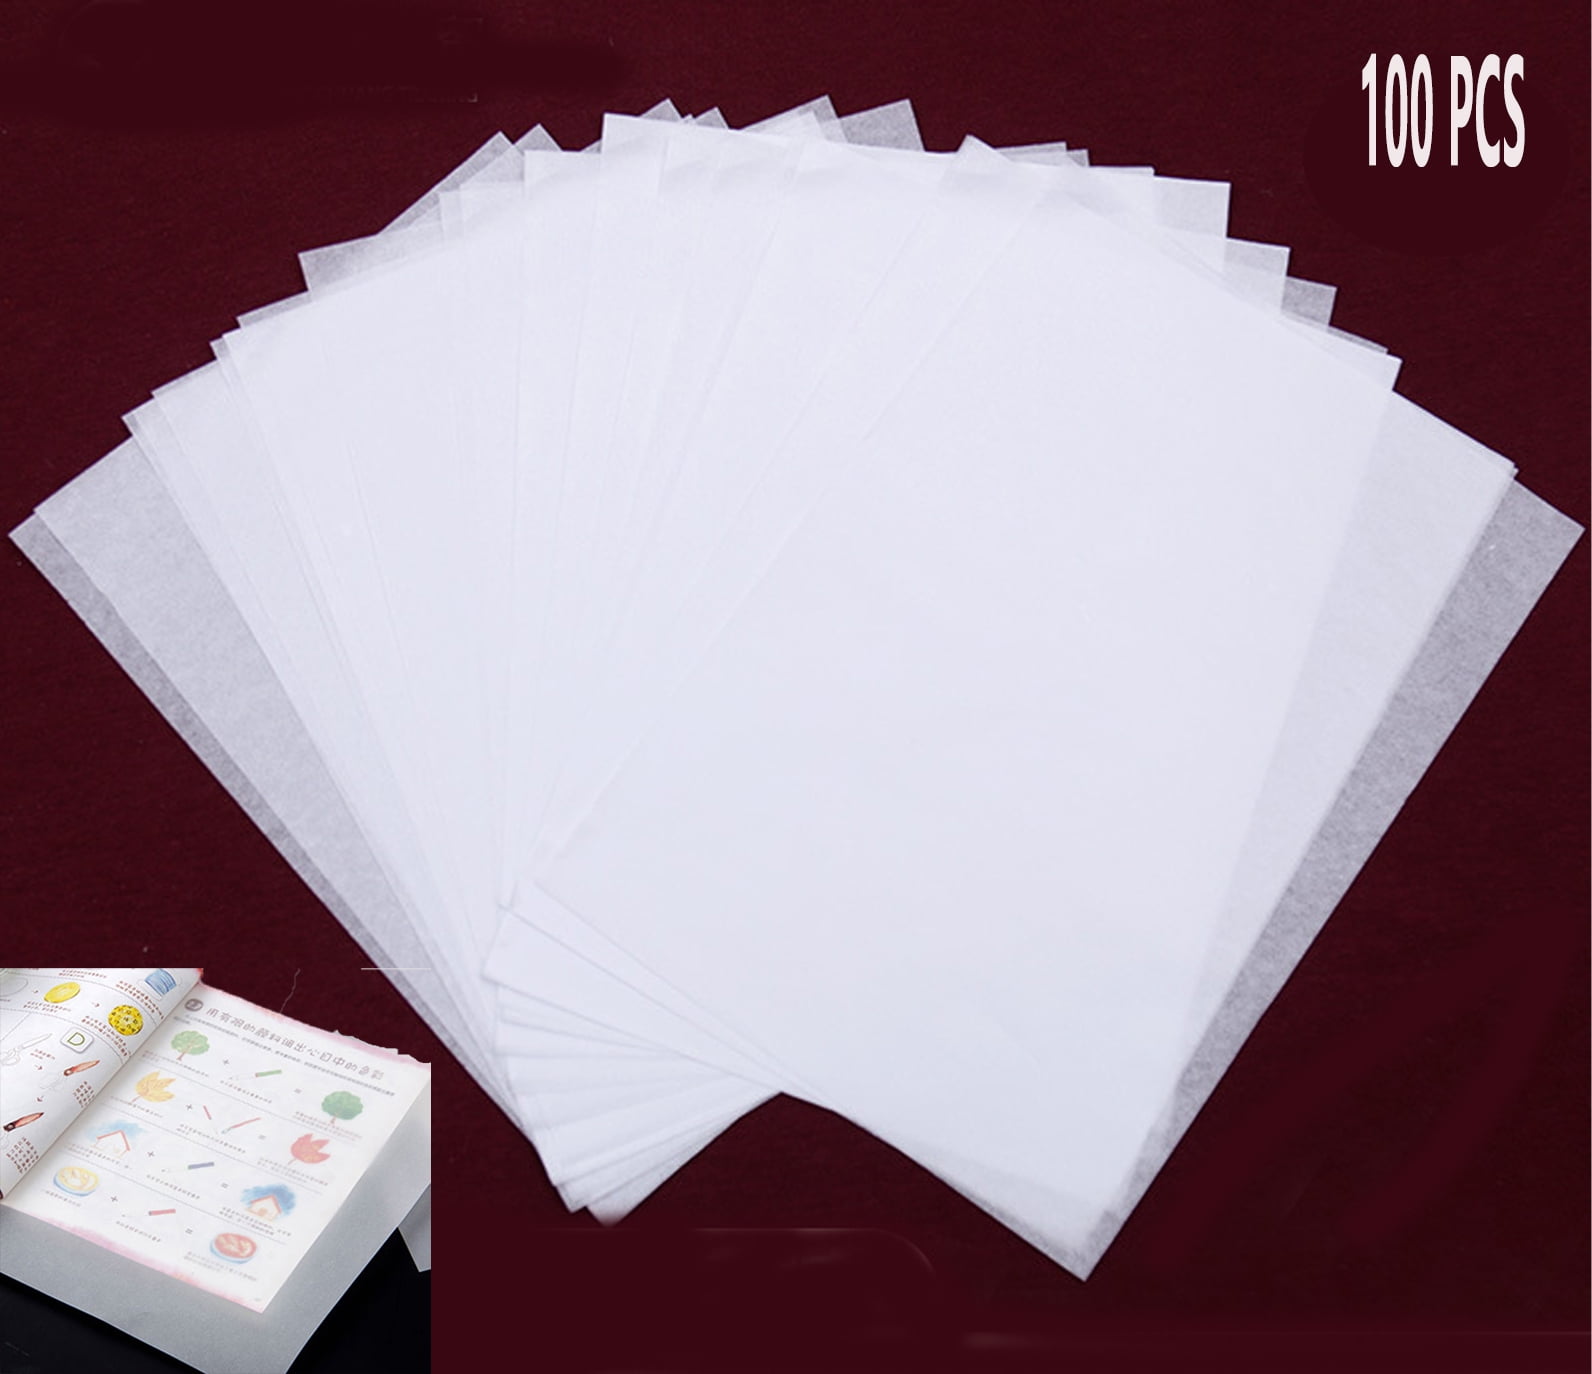 100pcs 16K Translucent Tracing Paper Copying Calligraphy Writing Drawing  Paper 